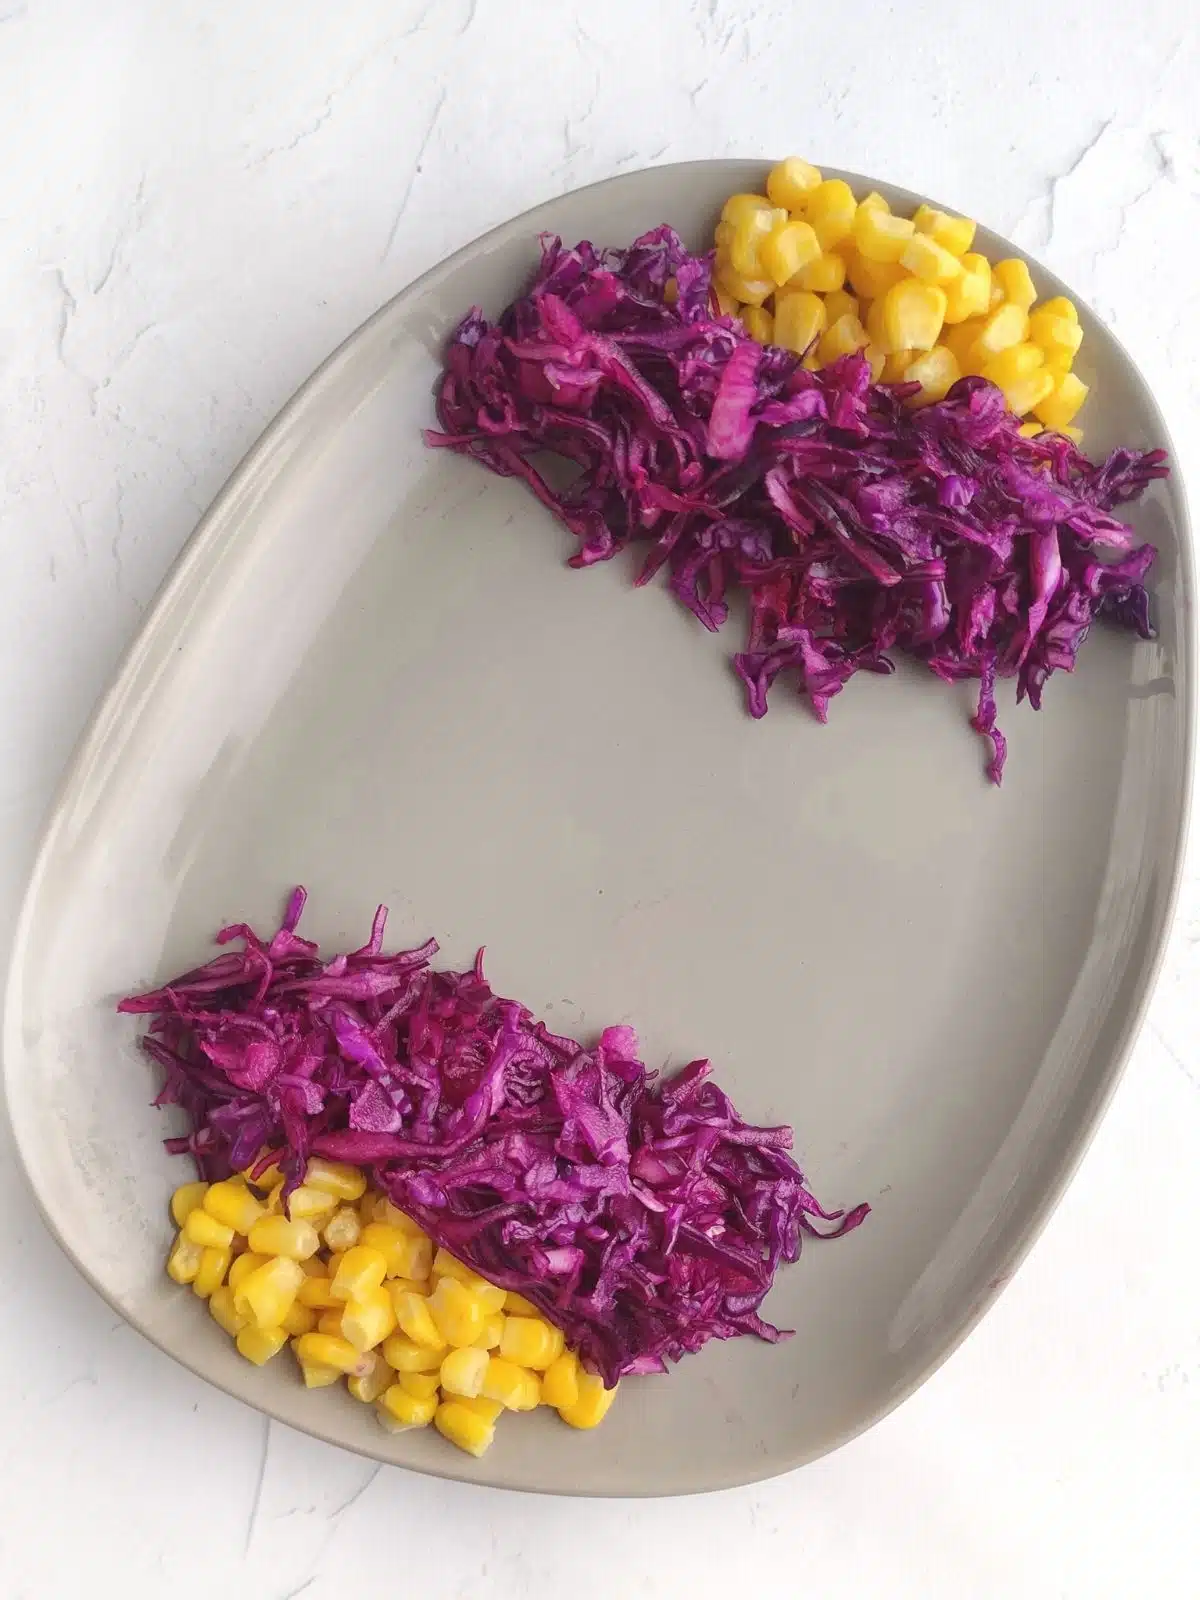 red cabbage and corn on egg shaped plate for salad.